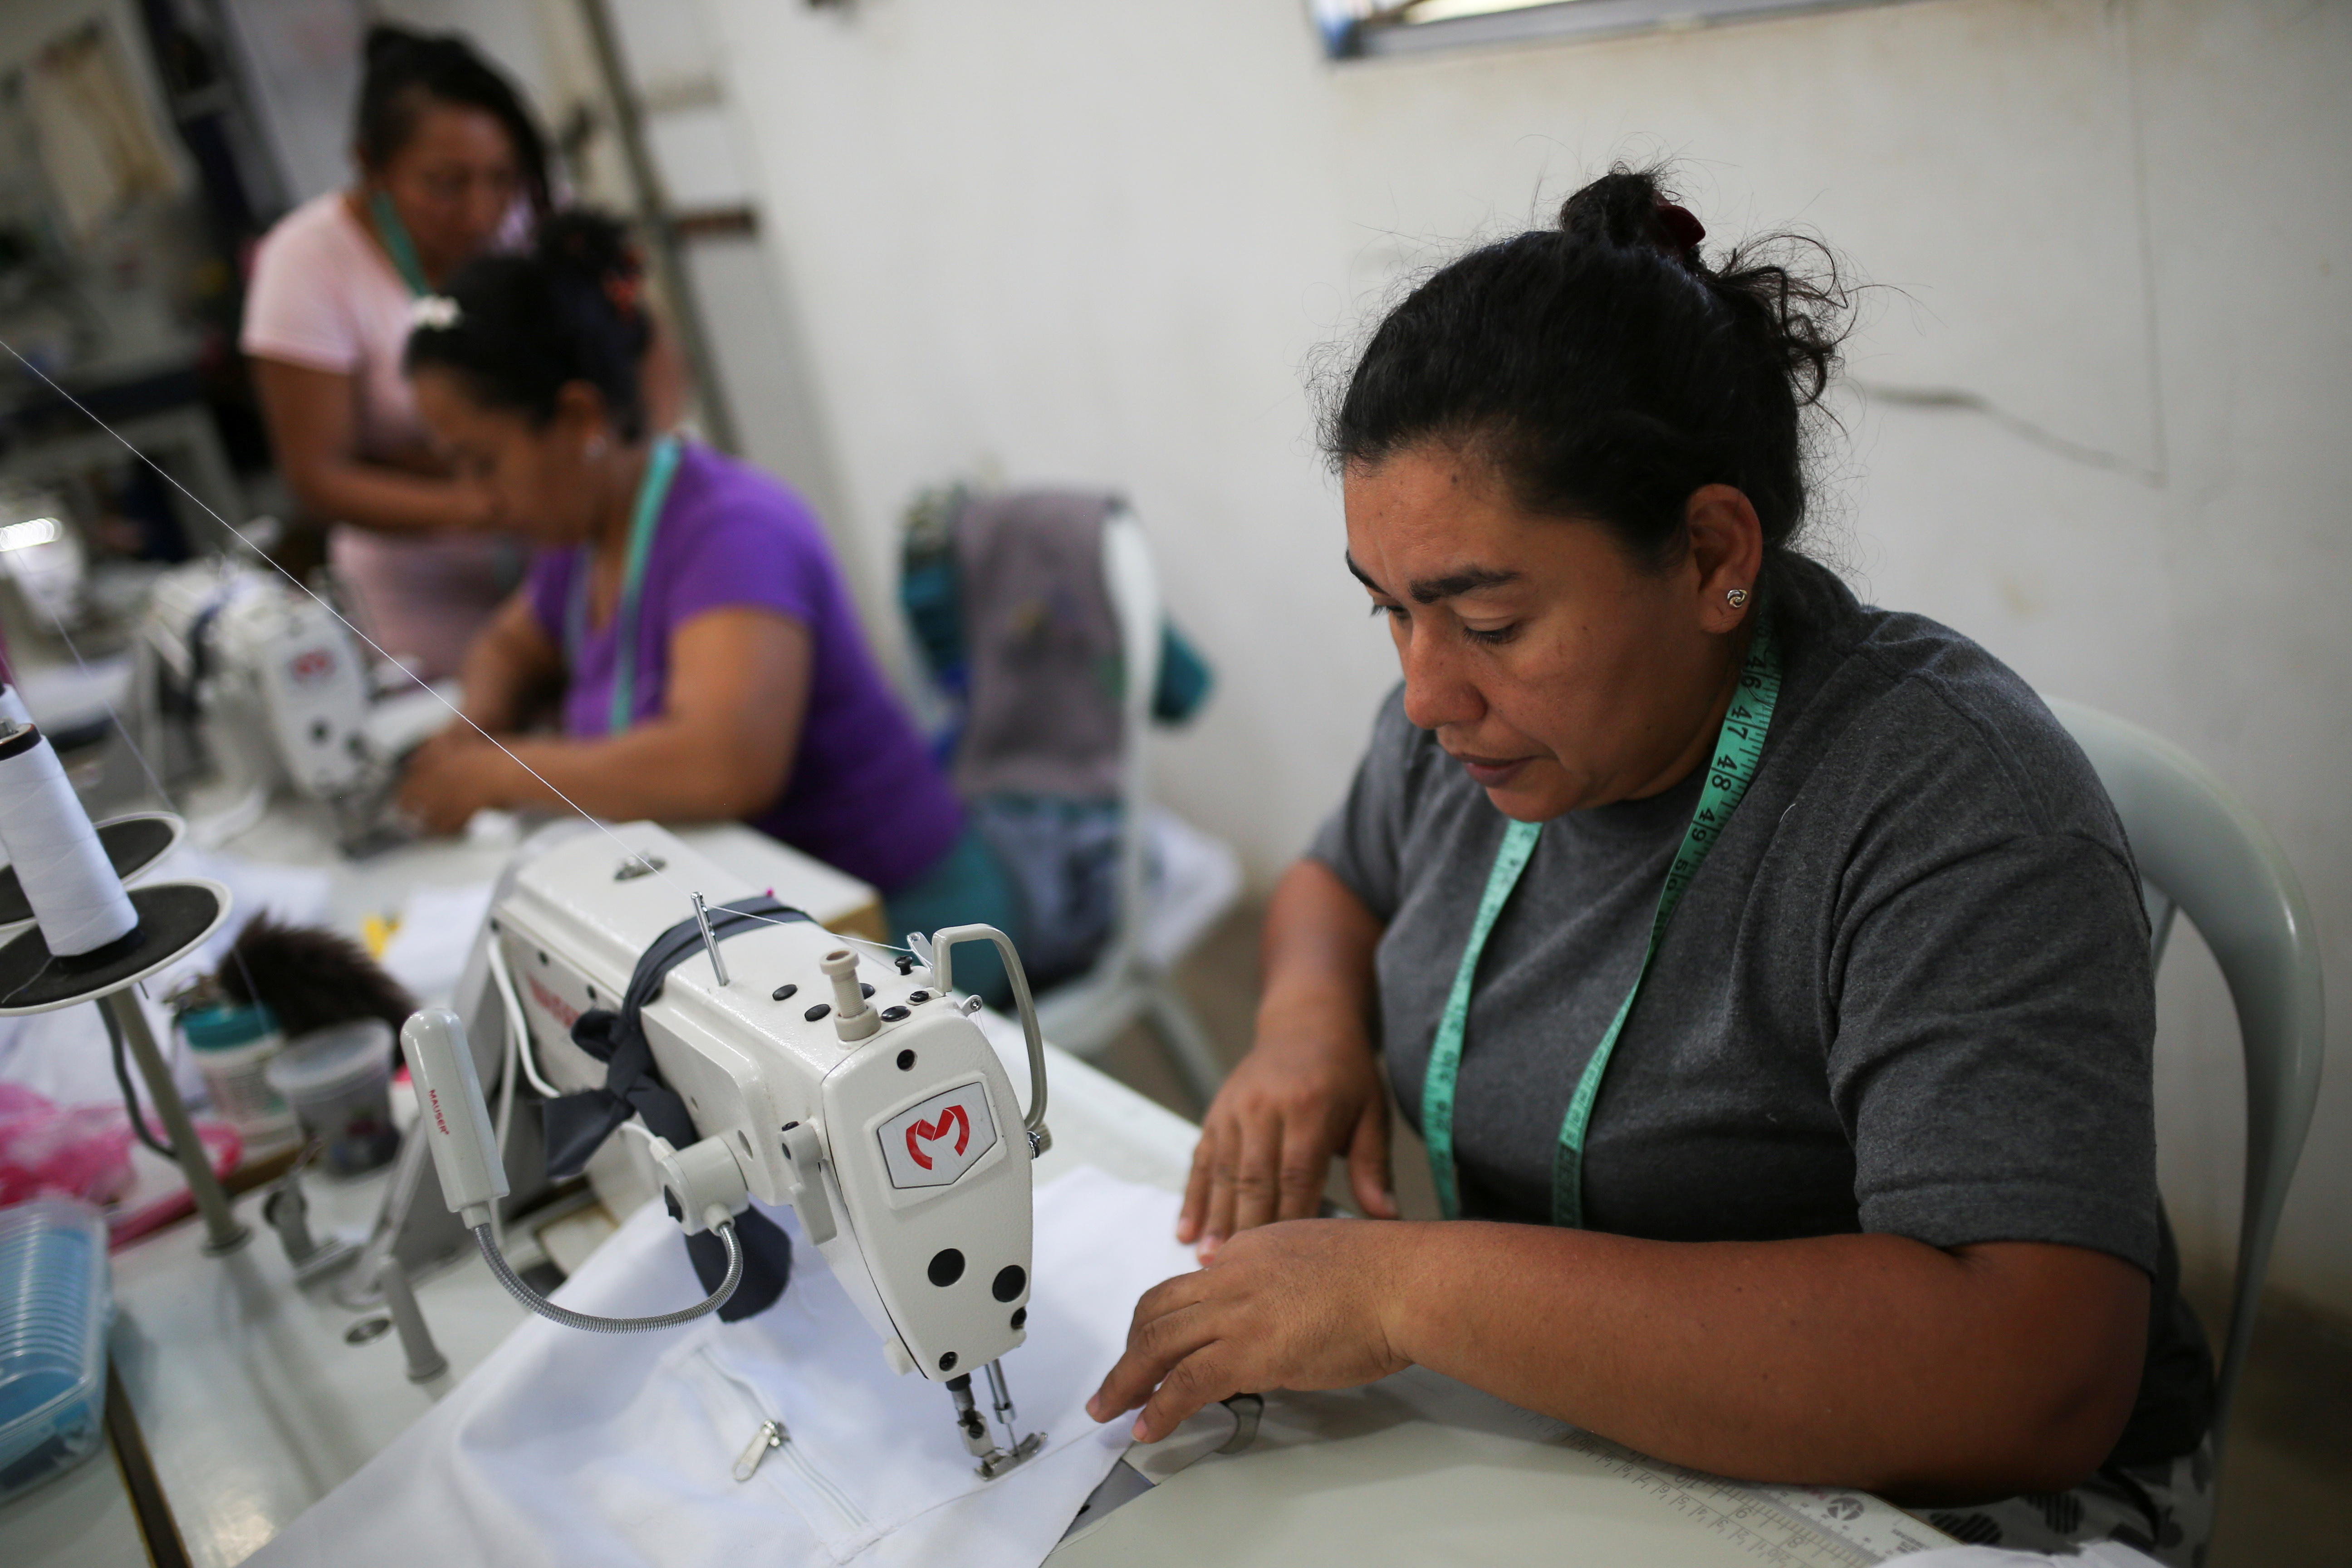 Yinis Pimienta, 40, former rebel of the Revolutionary Armed Forces of Colombia (FARC), makes clothes at a tailoring shop which is part of a productive project, at a reintegration camp in Pondores, Colombia November 9, 2021.  REUTERS/Luisa Gonzalez